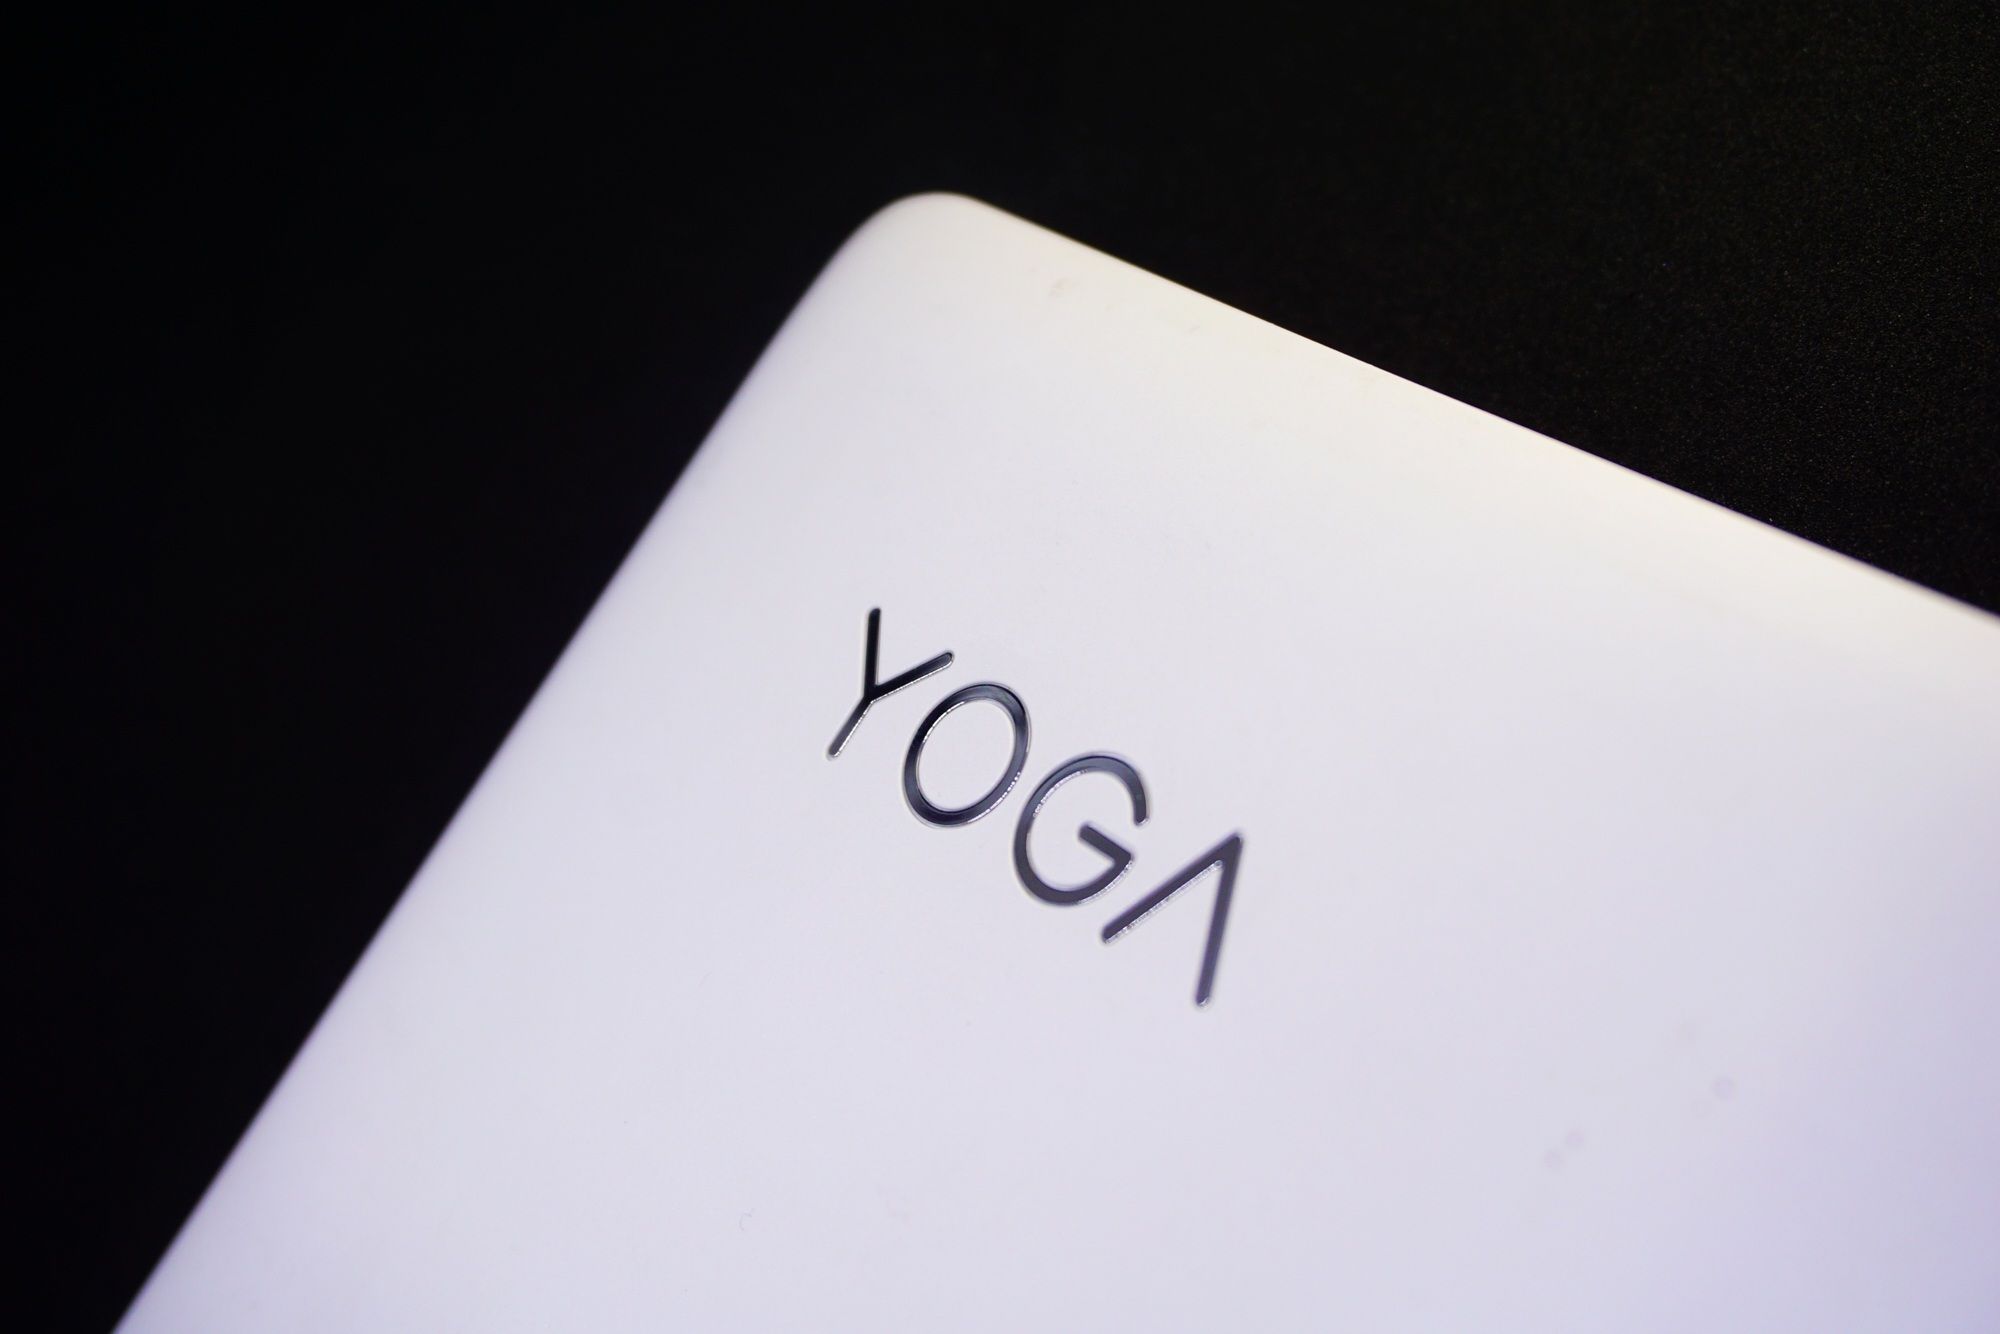 Lenovo Class Action Lawsuit Says Yoga Touchscreen Laptops Are Defective -  Top Class Actions